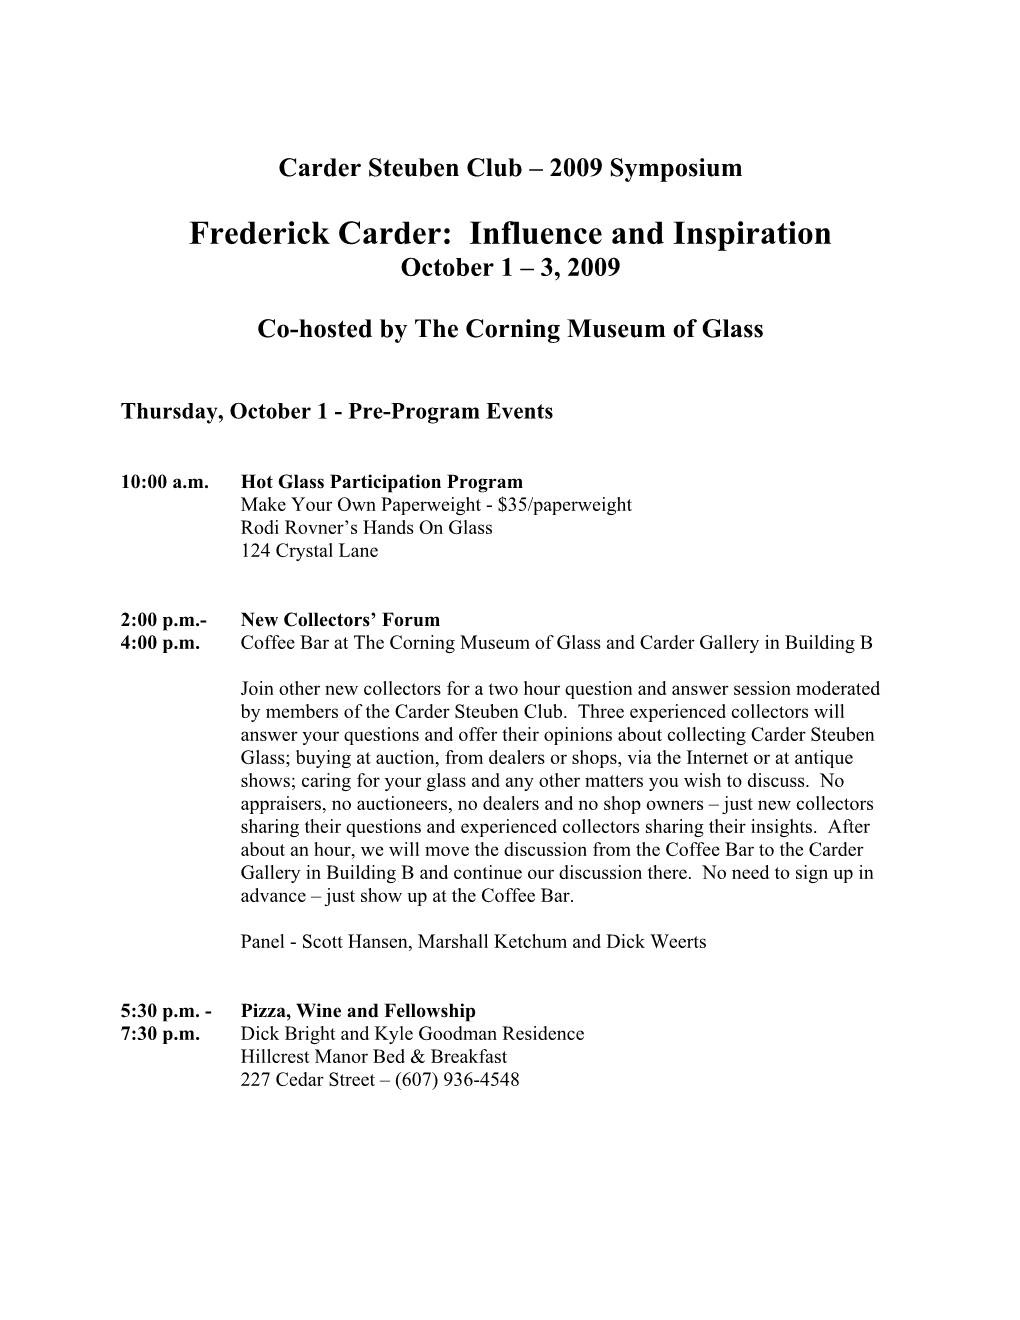 Frederick Carder: Influence and Inspiration October 1 – 3, 2009